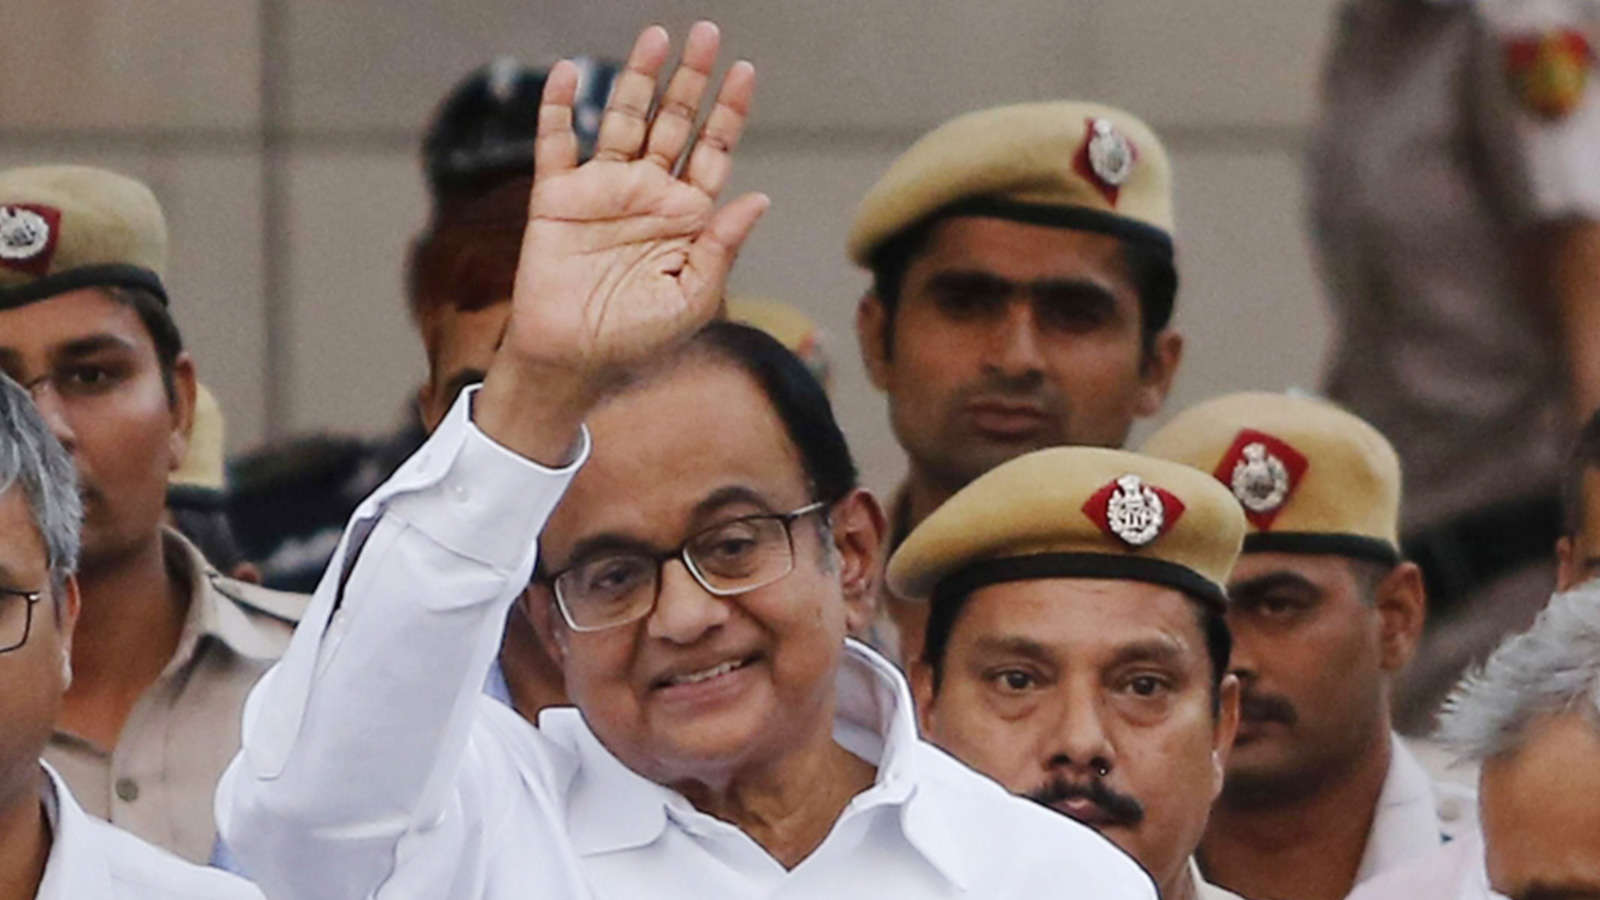 inx-media-case-chidambaram-gets-bail-to-be-released-from-tihar-after-105-days-in-custody-1575439365